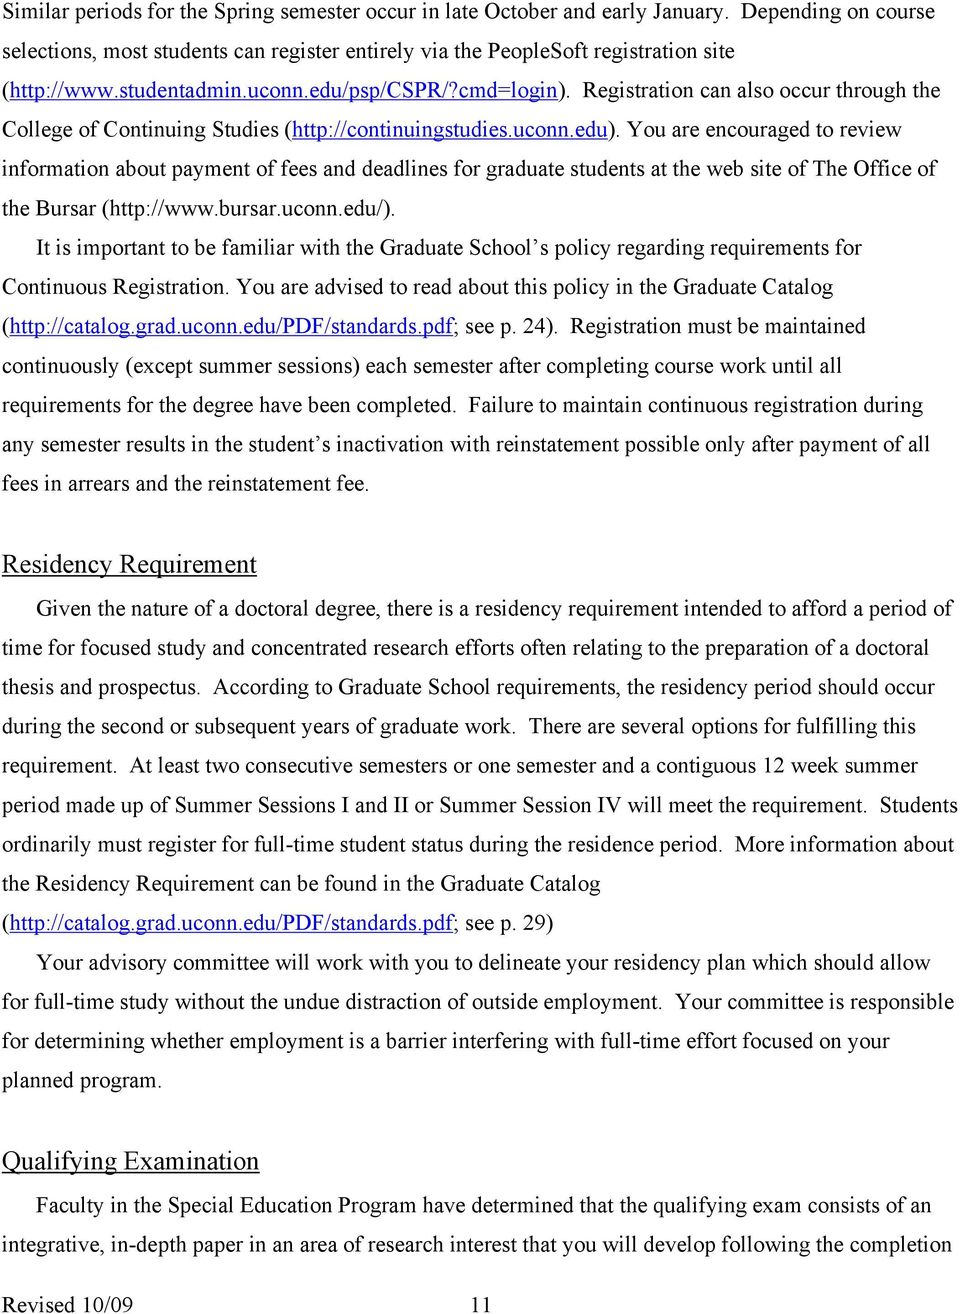 You are encouraged to review information about payment of fees and deadlines for graduate students at the web site of The Office of the Bursar (http://www.bursar.uconn.edu/).